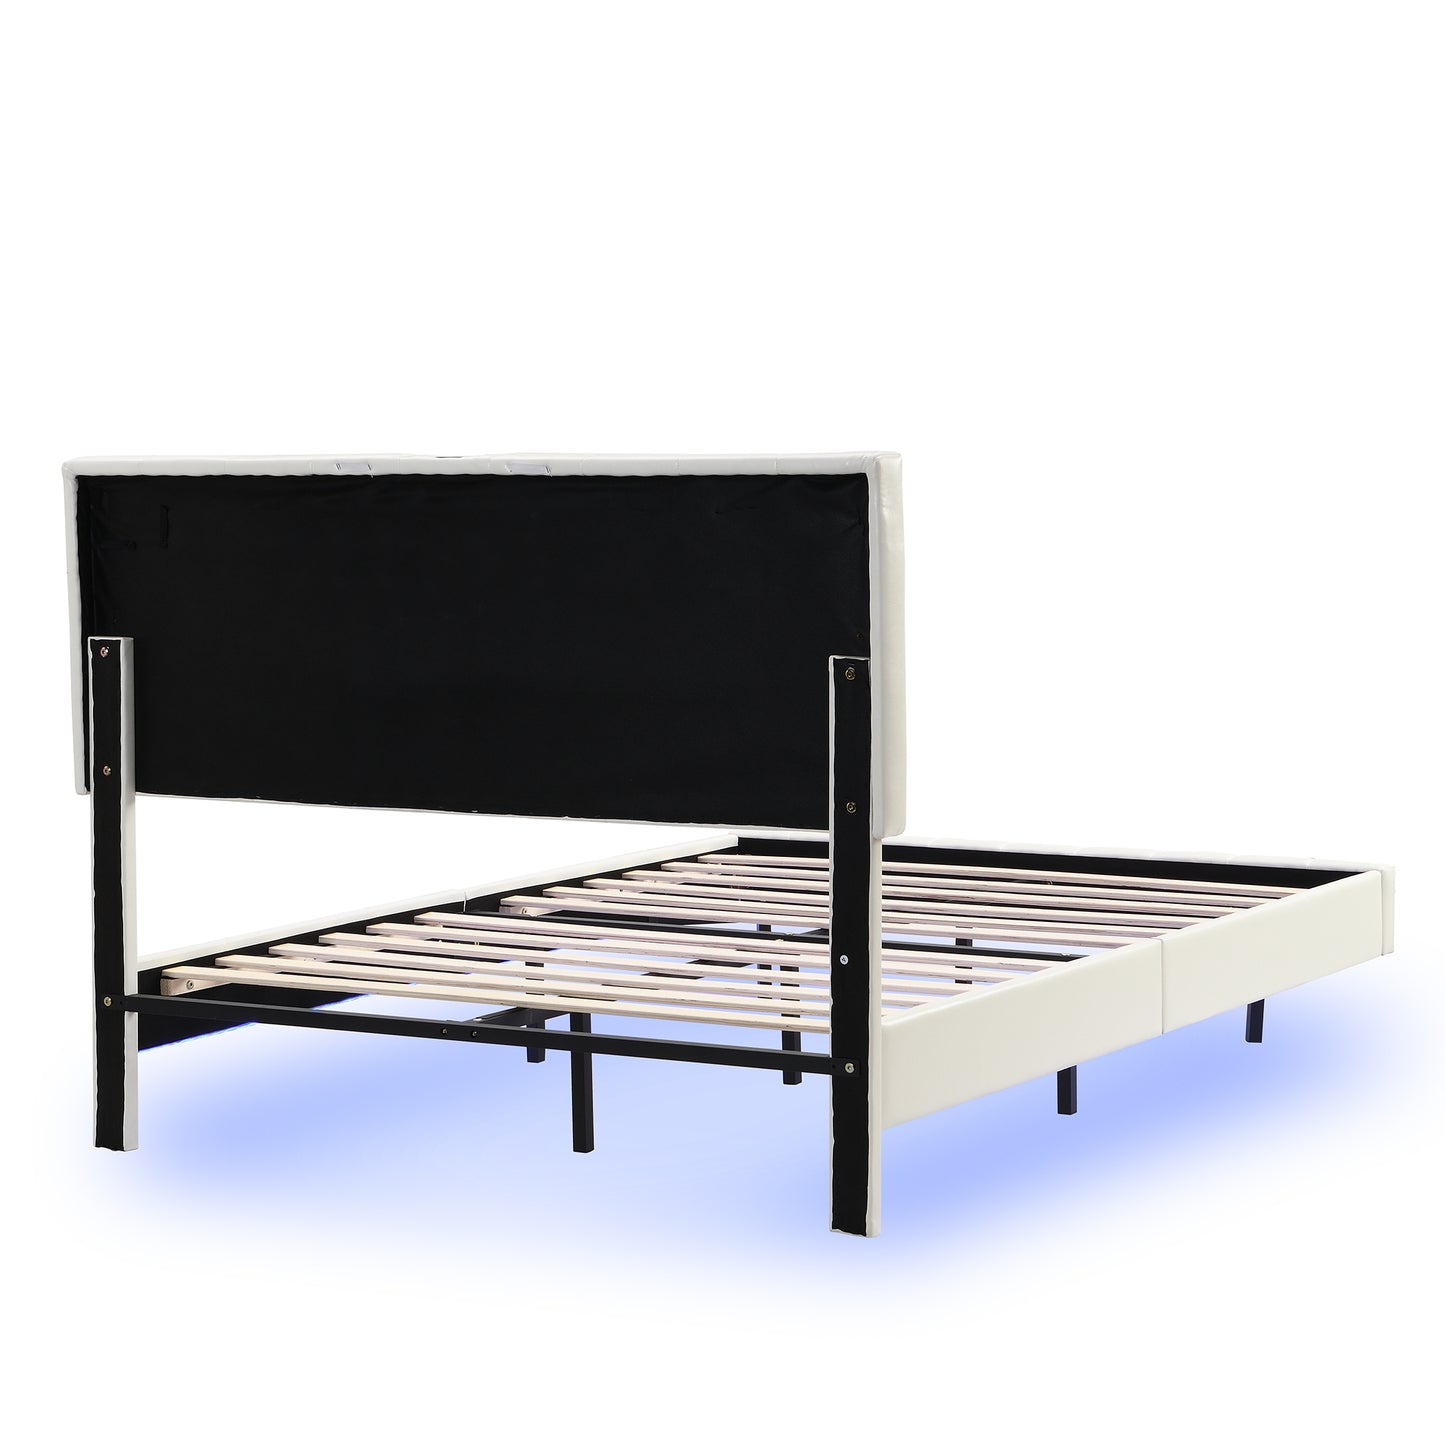 Clara Queen Size Floating Bed Frame with LED Lights and USB Charging